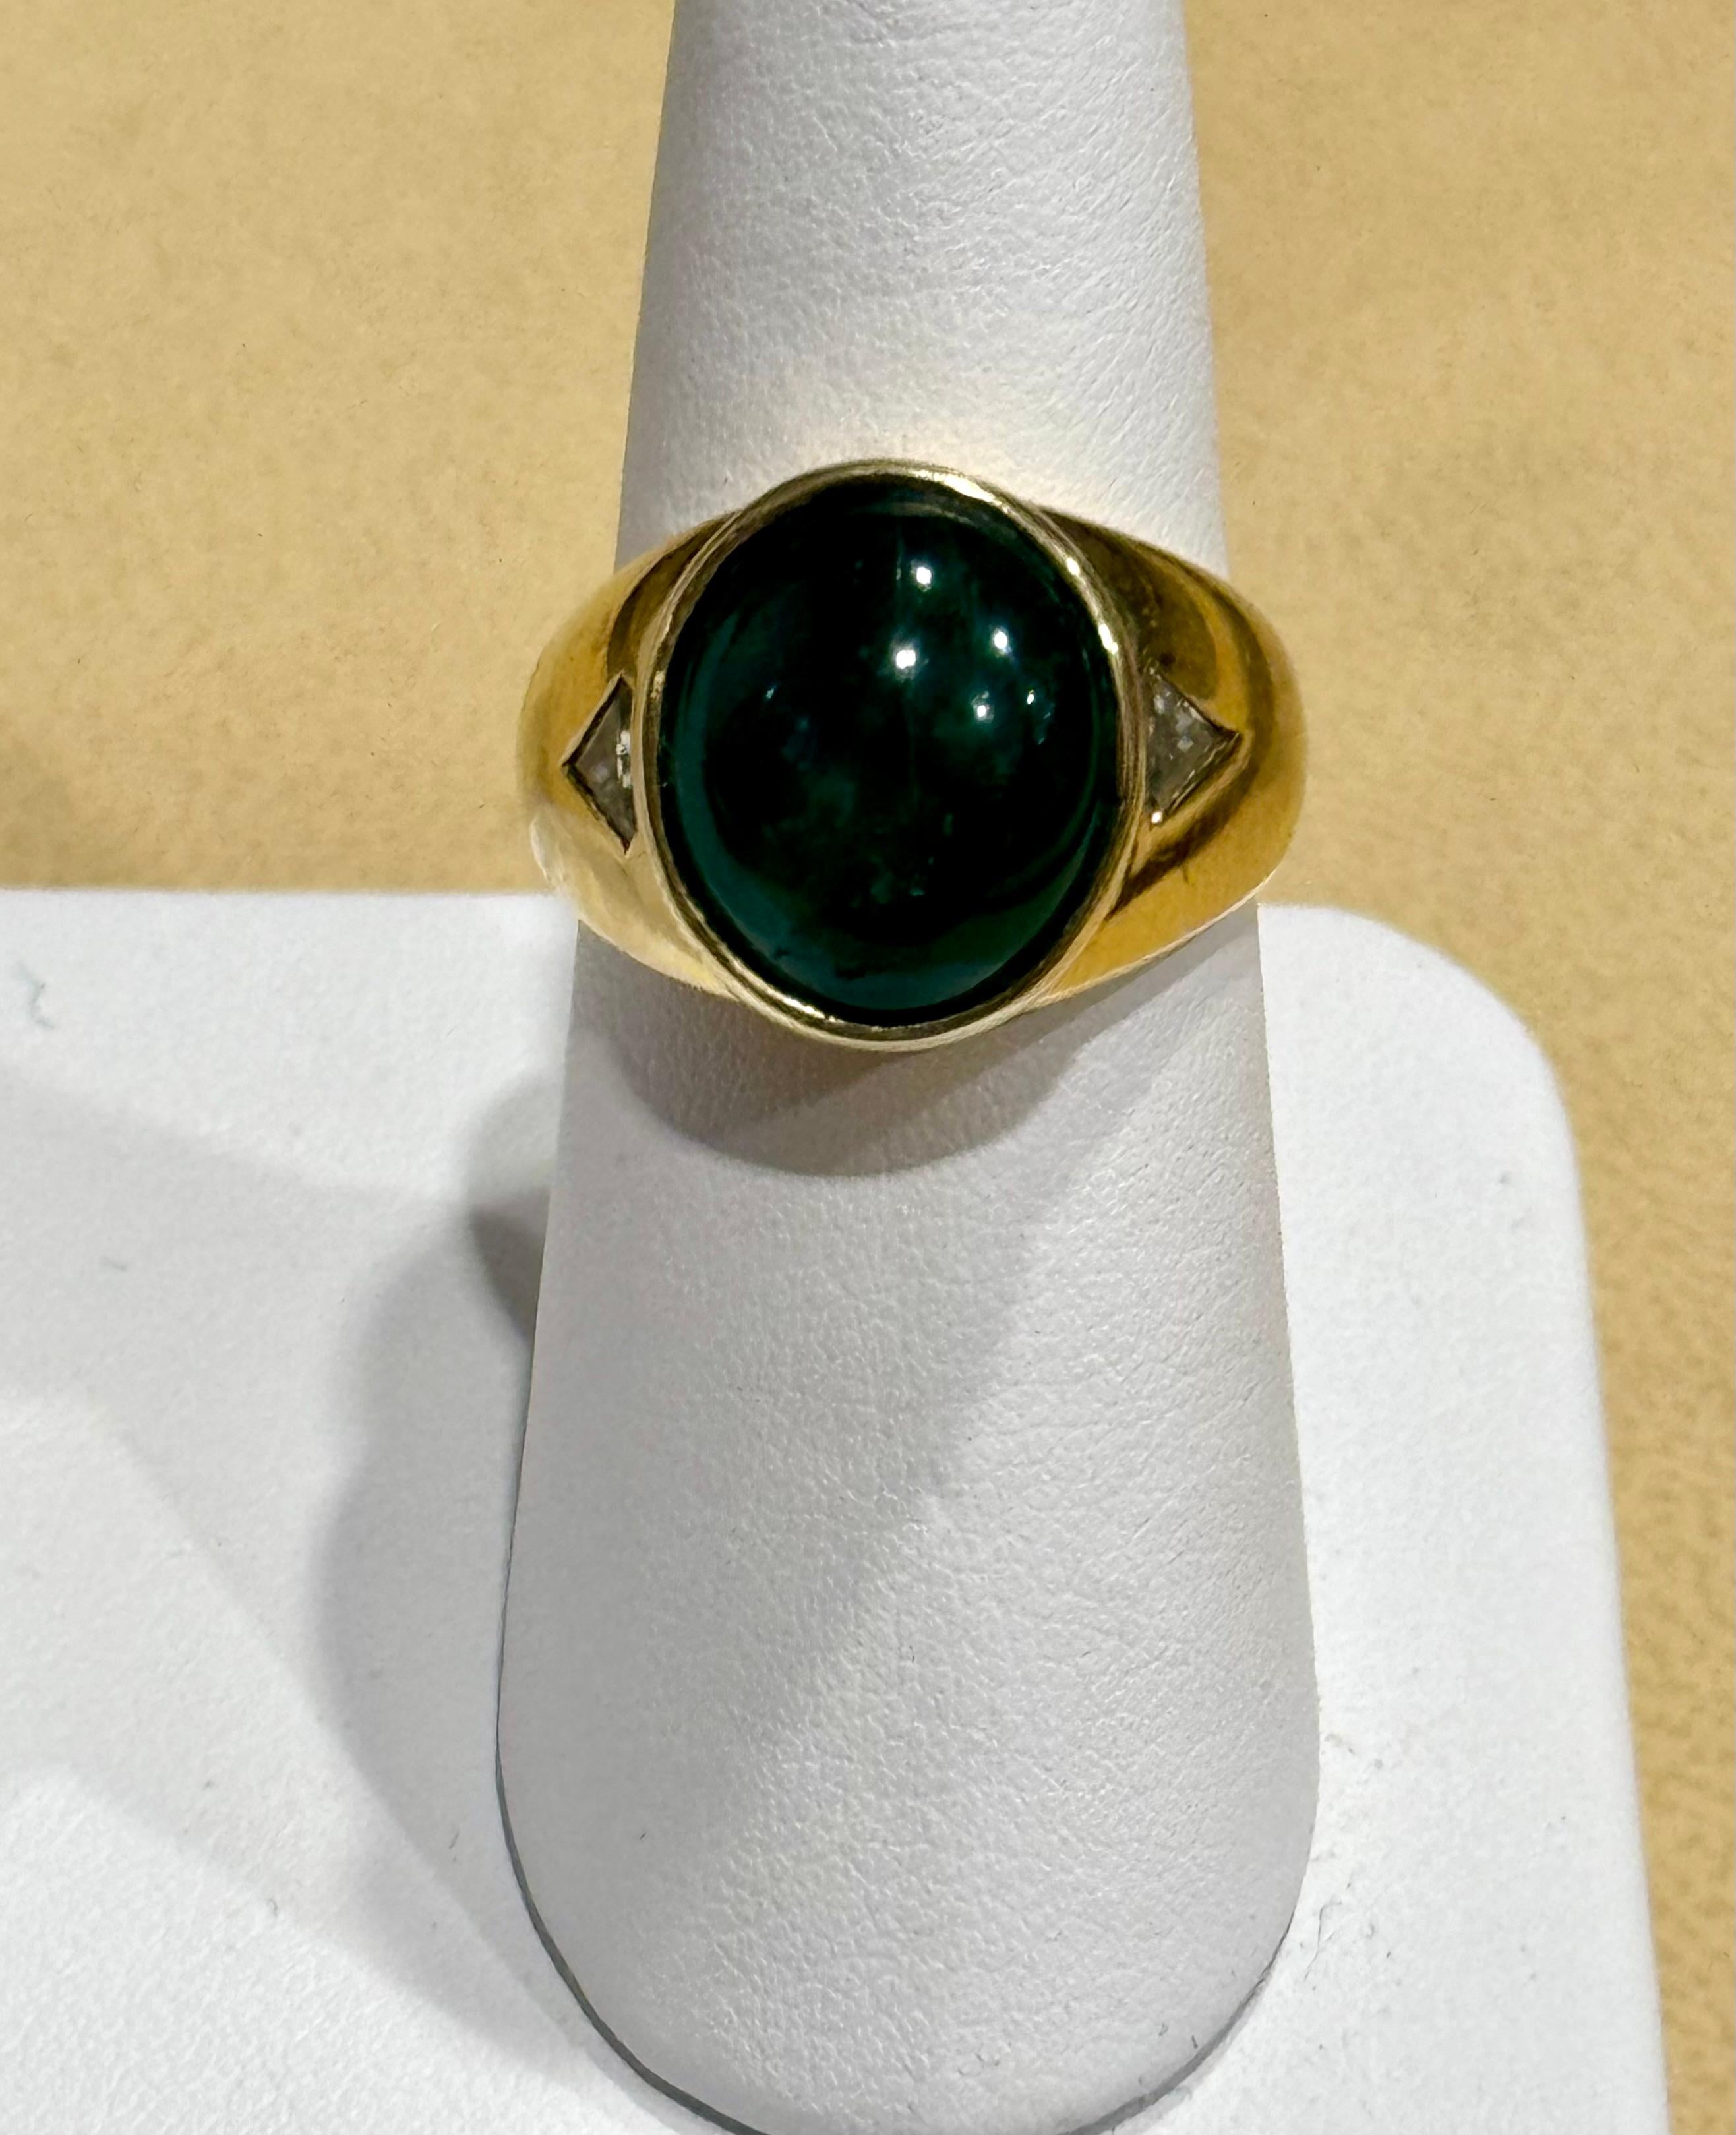 7 Ct Oval Emerald Cabochon 18 Kt Yellow Gold & Diamond Cocktail Ring Vintage Men
This classic cocktail ring is a stunning piece of jewelry that features an approximately 7 carat natural emerald cabochon. The estate piece has not undergone any color